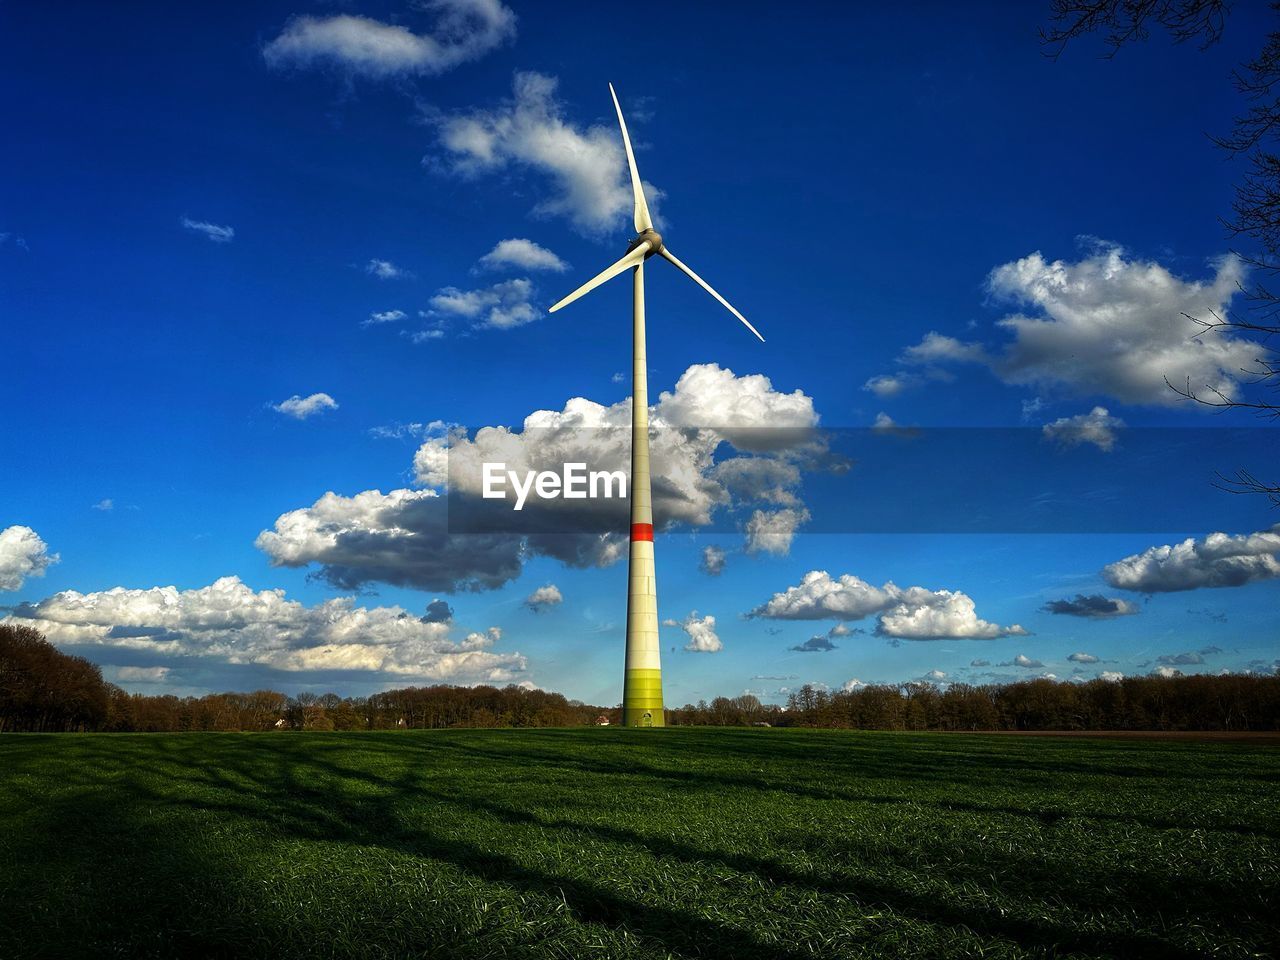 environment, sky, environmental conservation, wind turbine, turbine, wind power, renewable energy, power generation, landscape, alternative energy, nature, windmill, cloud, rural scene, land, field, plant, agriculture, grass, blue, beauty in nature, wind, farm, scenics - nature, technology, wind farm, electricity, no people, social issues, sustainable resources, tree, plain, outdoors, grassland, power in nature, day, rural area, sunlight, meadow, green, tranquility, power supply, environmental issues, crop, machine, horizon, architecture, non-urban scene, prairie, tranquil scene